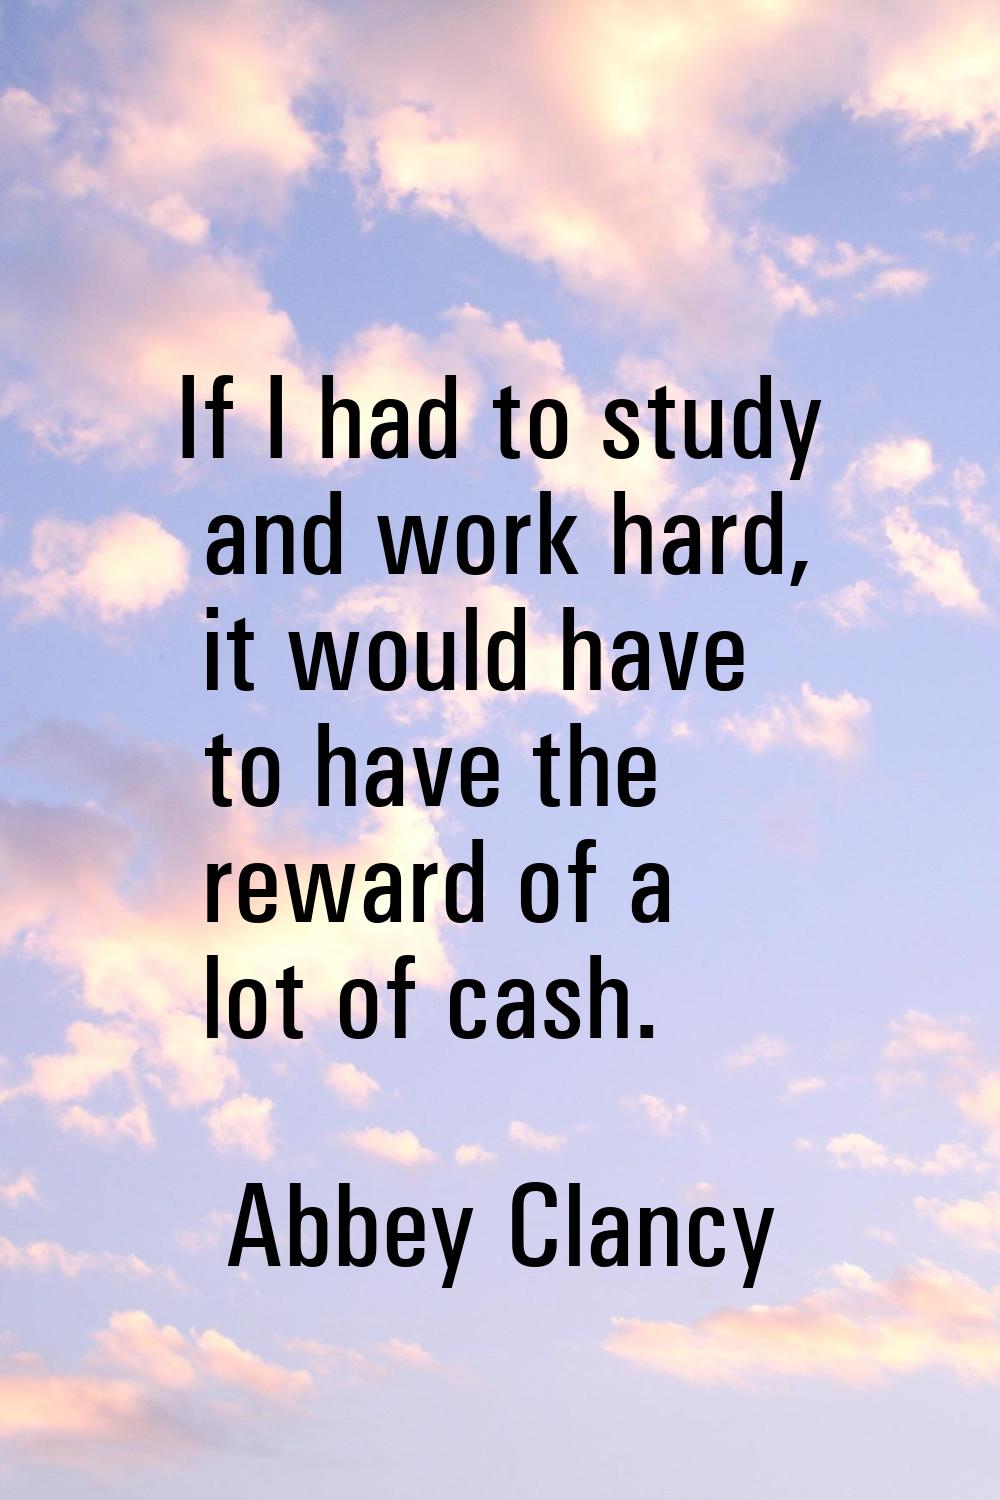 If I had to study and work hard, it would have to have the reward of a lot of cash.